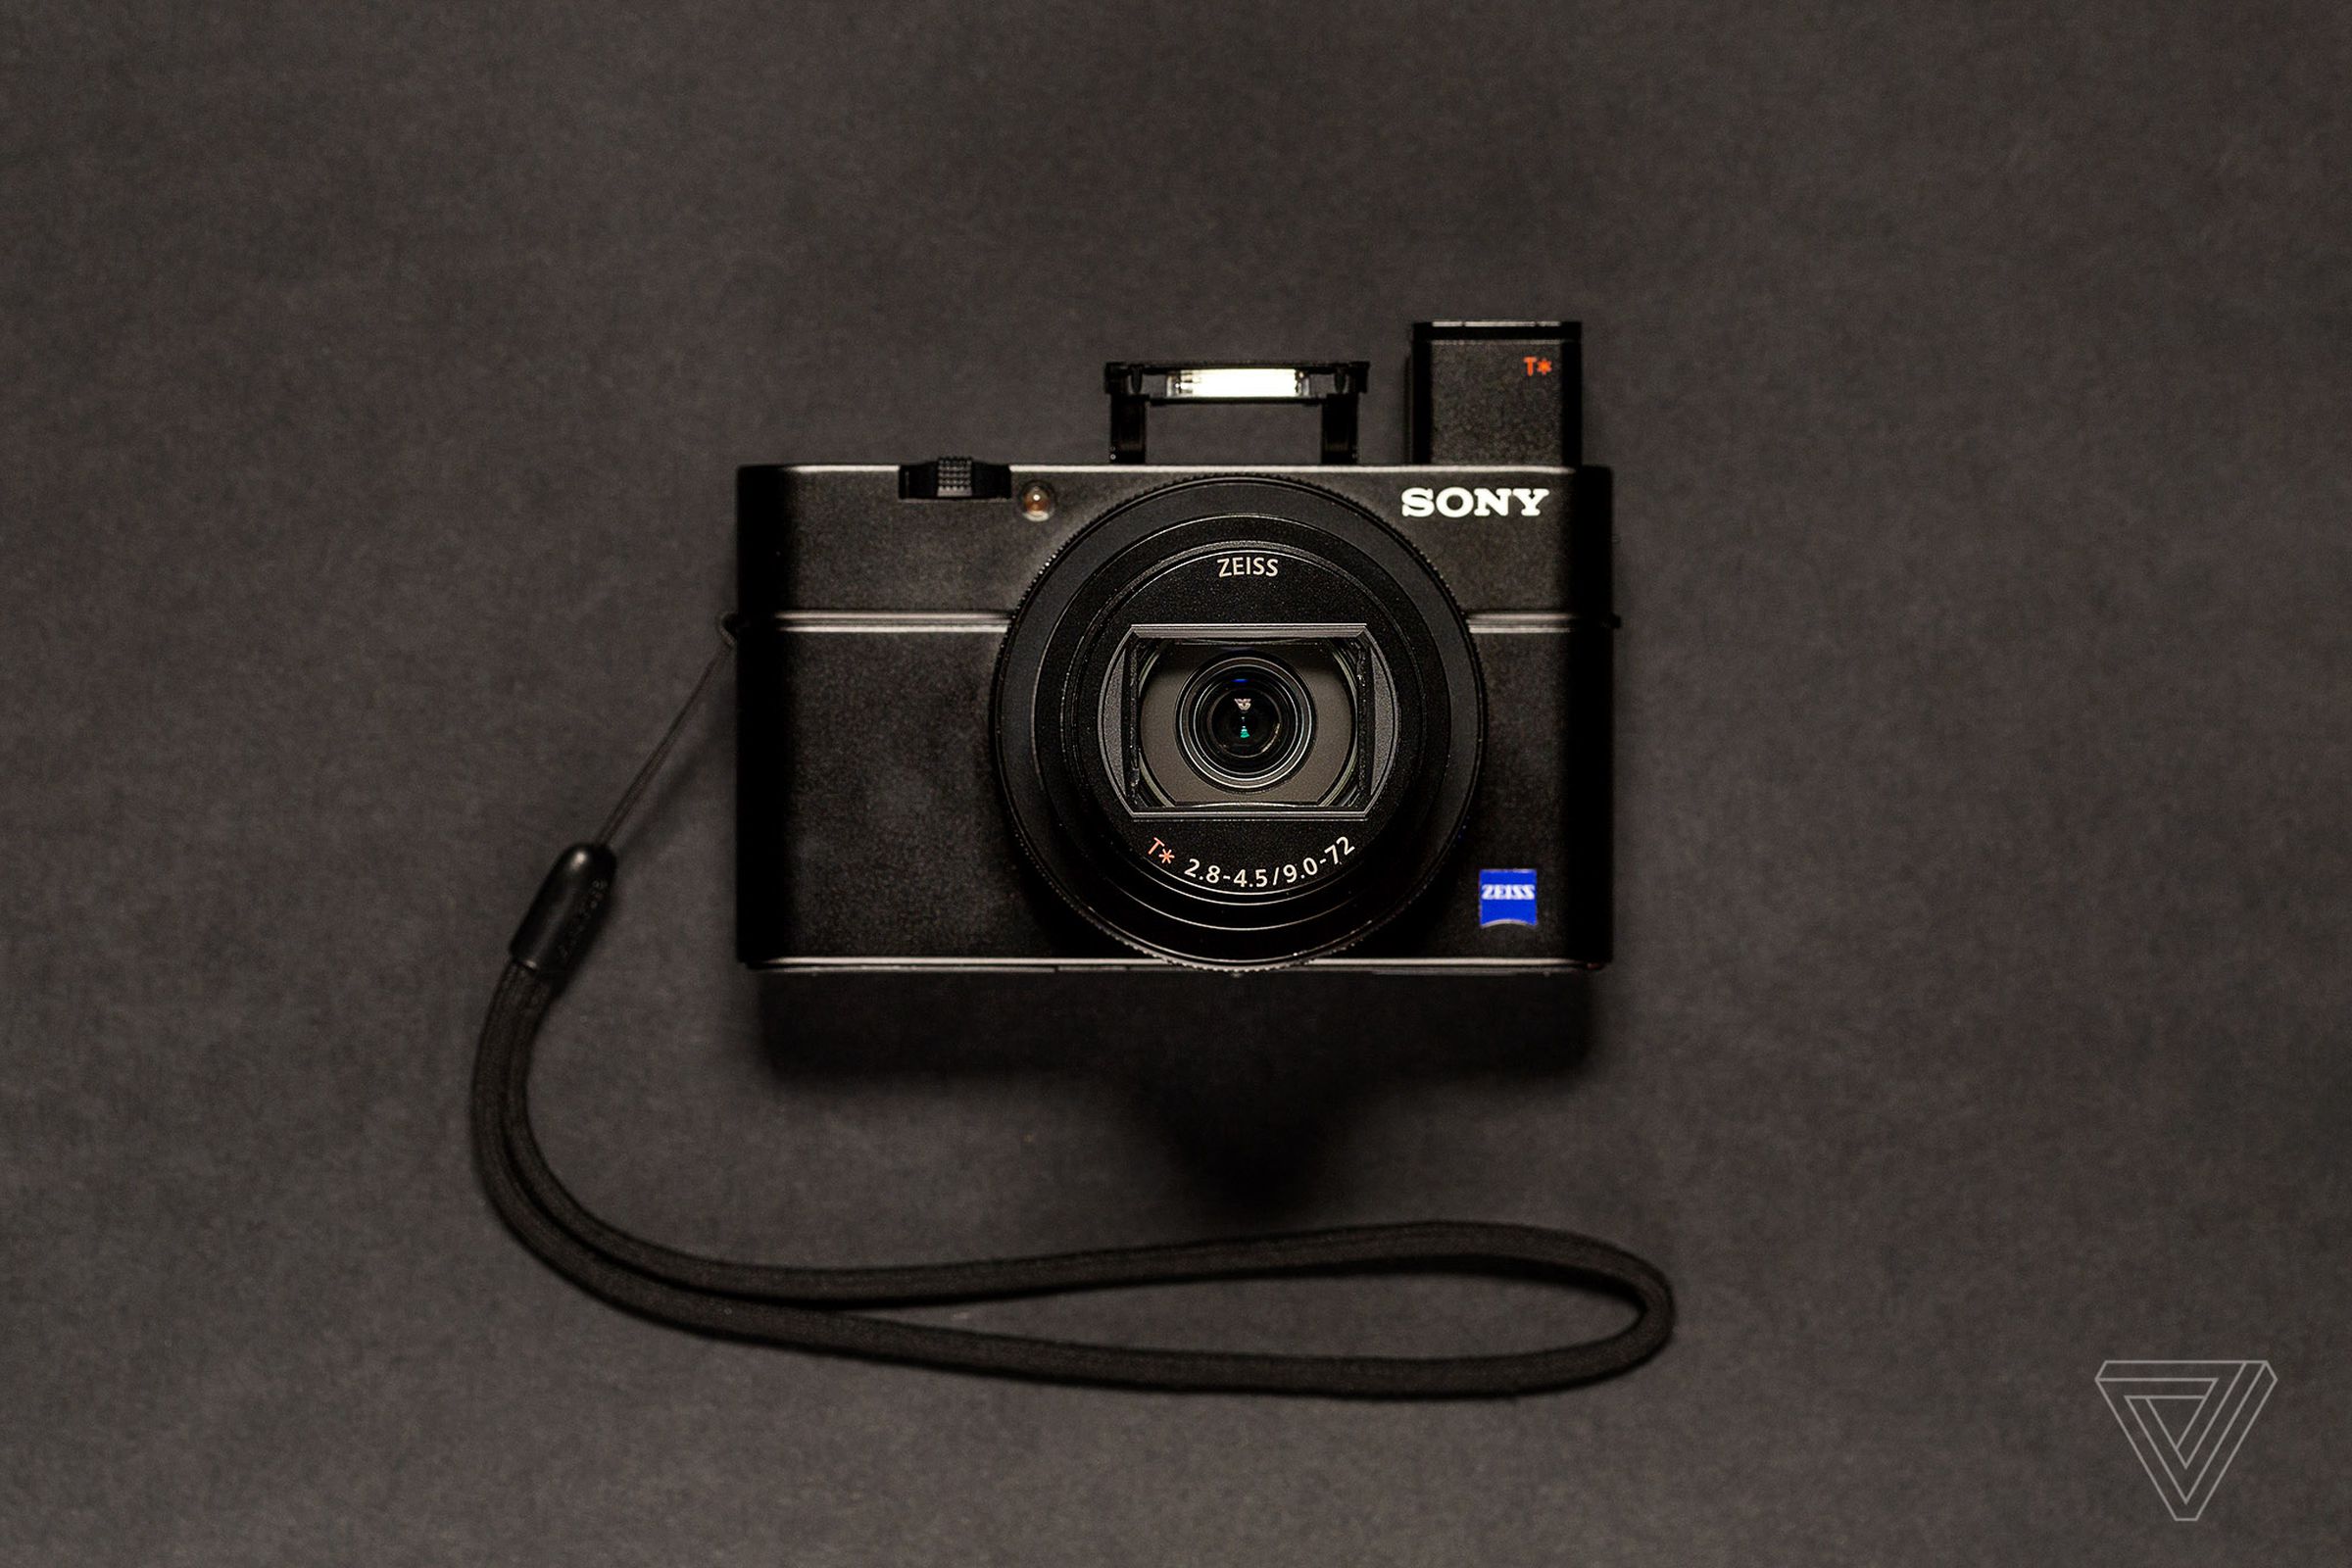 The Sony RX100 is tiny and takes consistently better photos than any phone. Even earlier models are remarkably good and much less than the cost of a new iPhone.